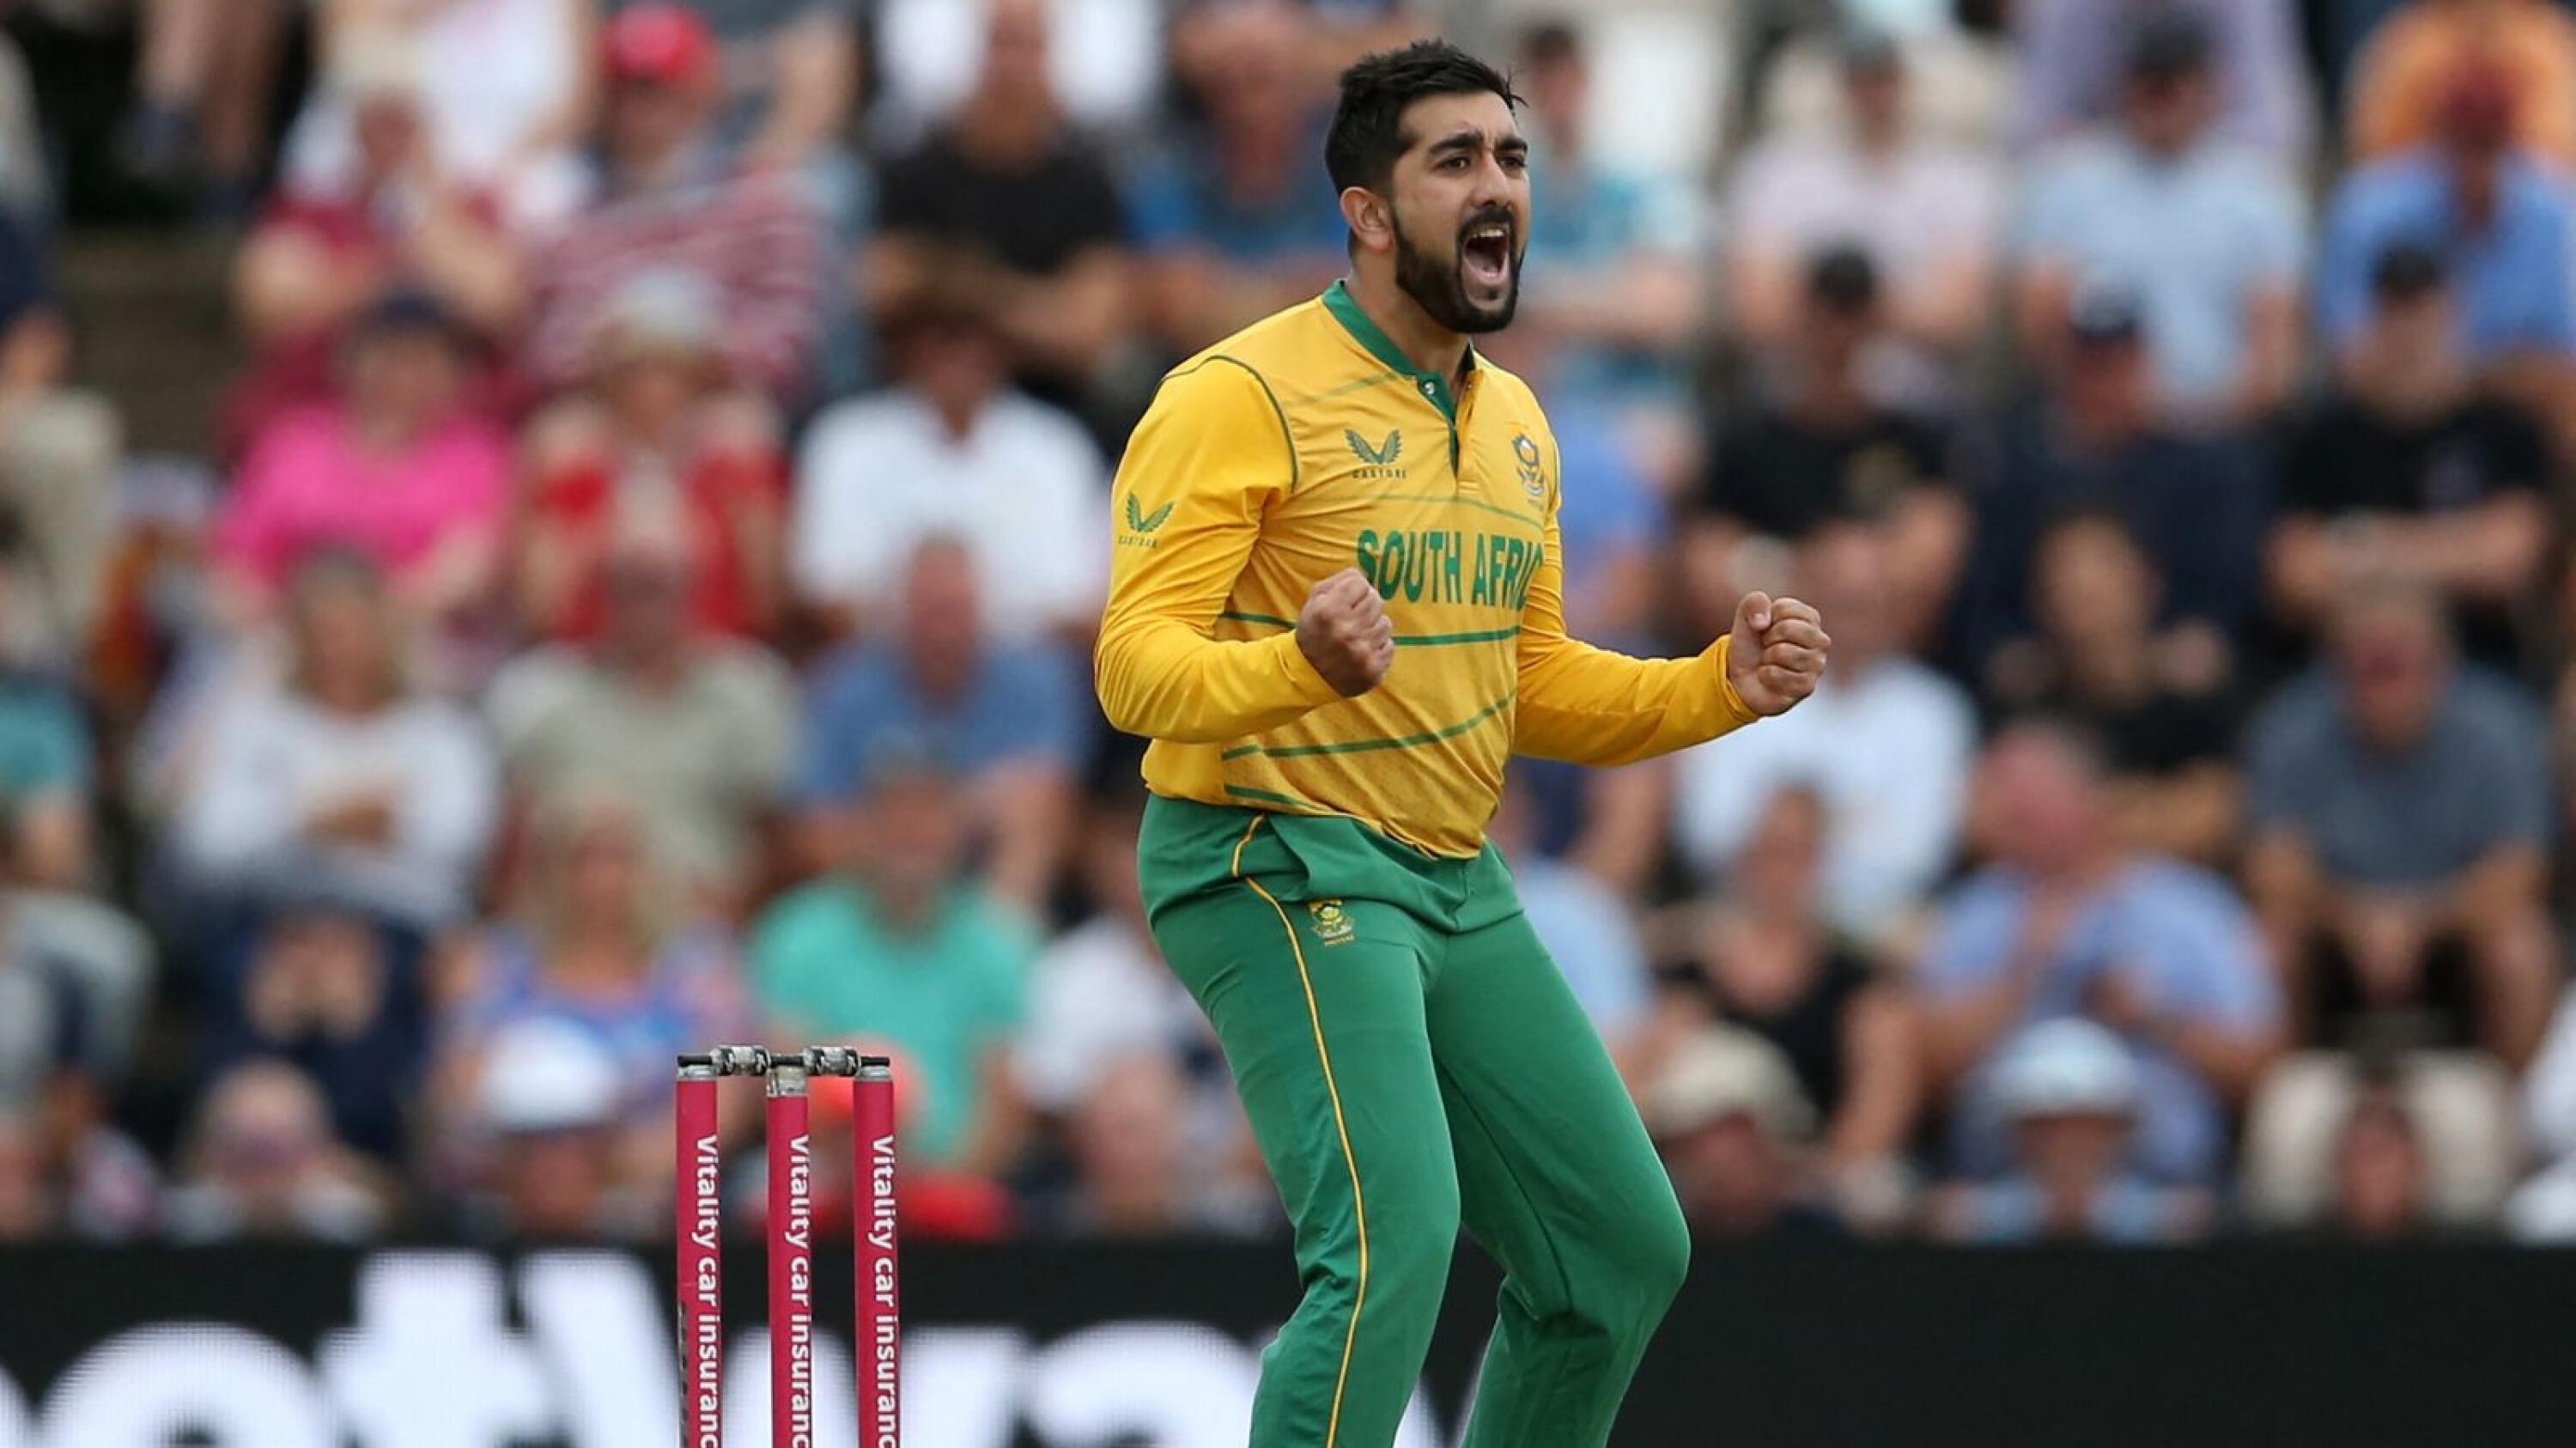 South Africa's Tabraiz Shamsi celebrates after taking a wicket during a T20 international cricket match against England